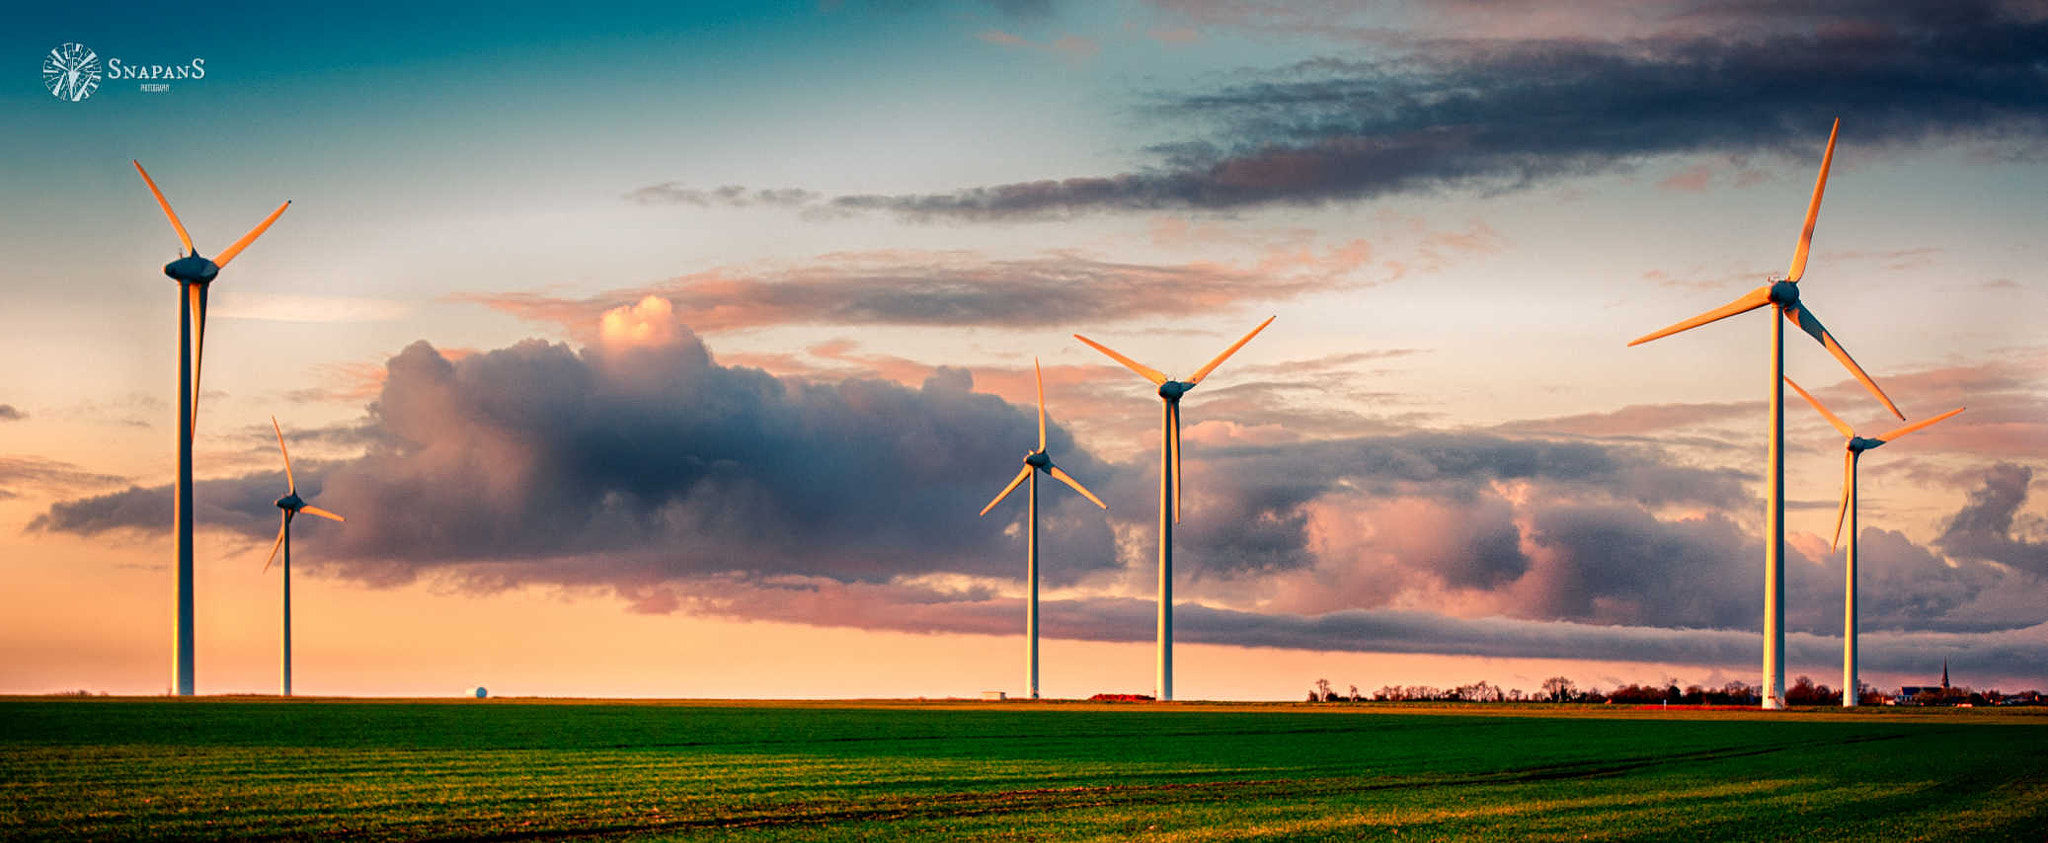 Nikon D700 sample photo. Wind turbines in the sunset photography